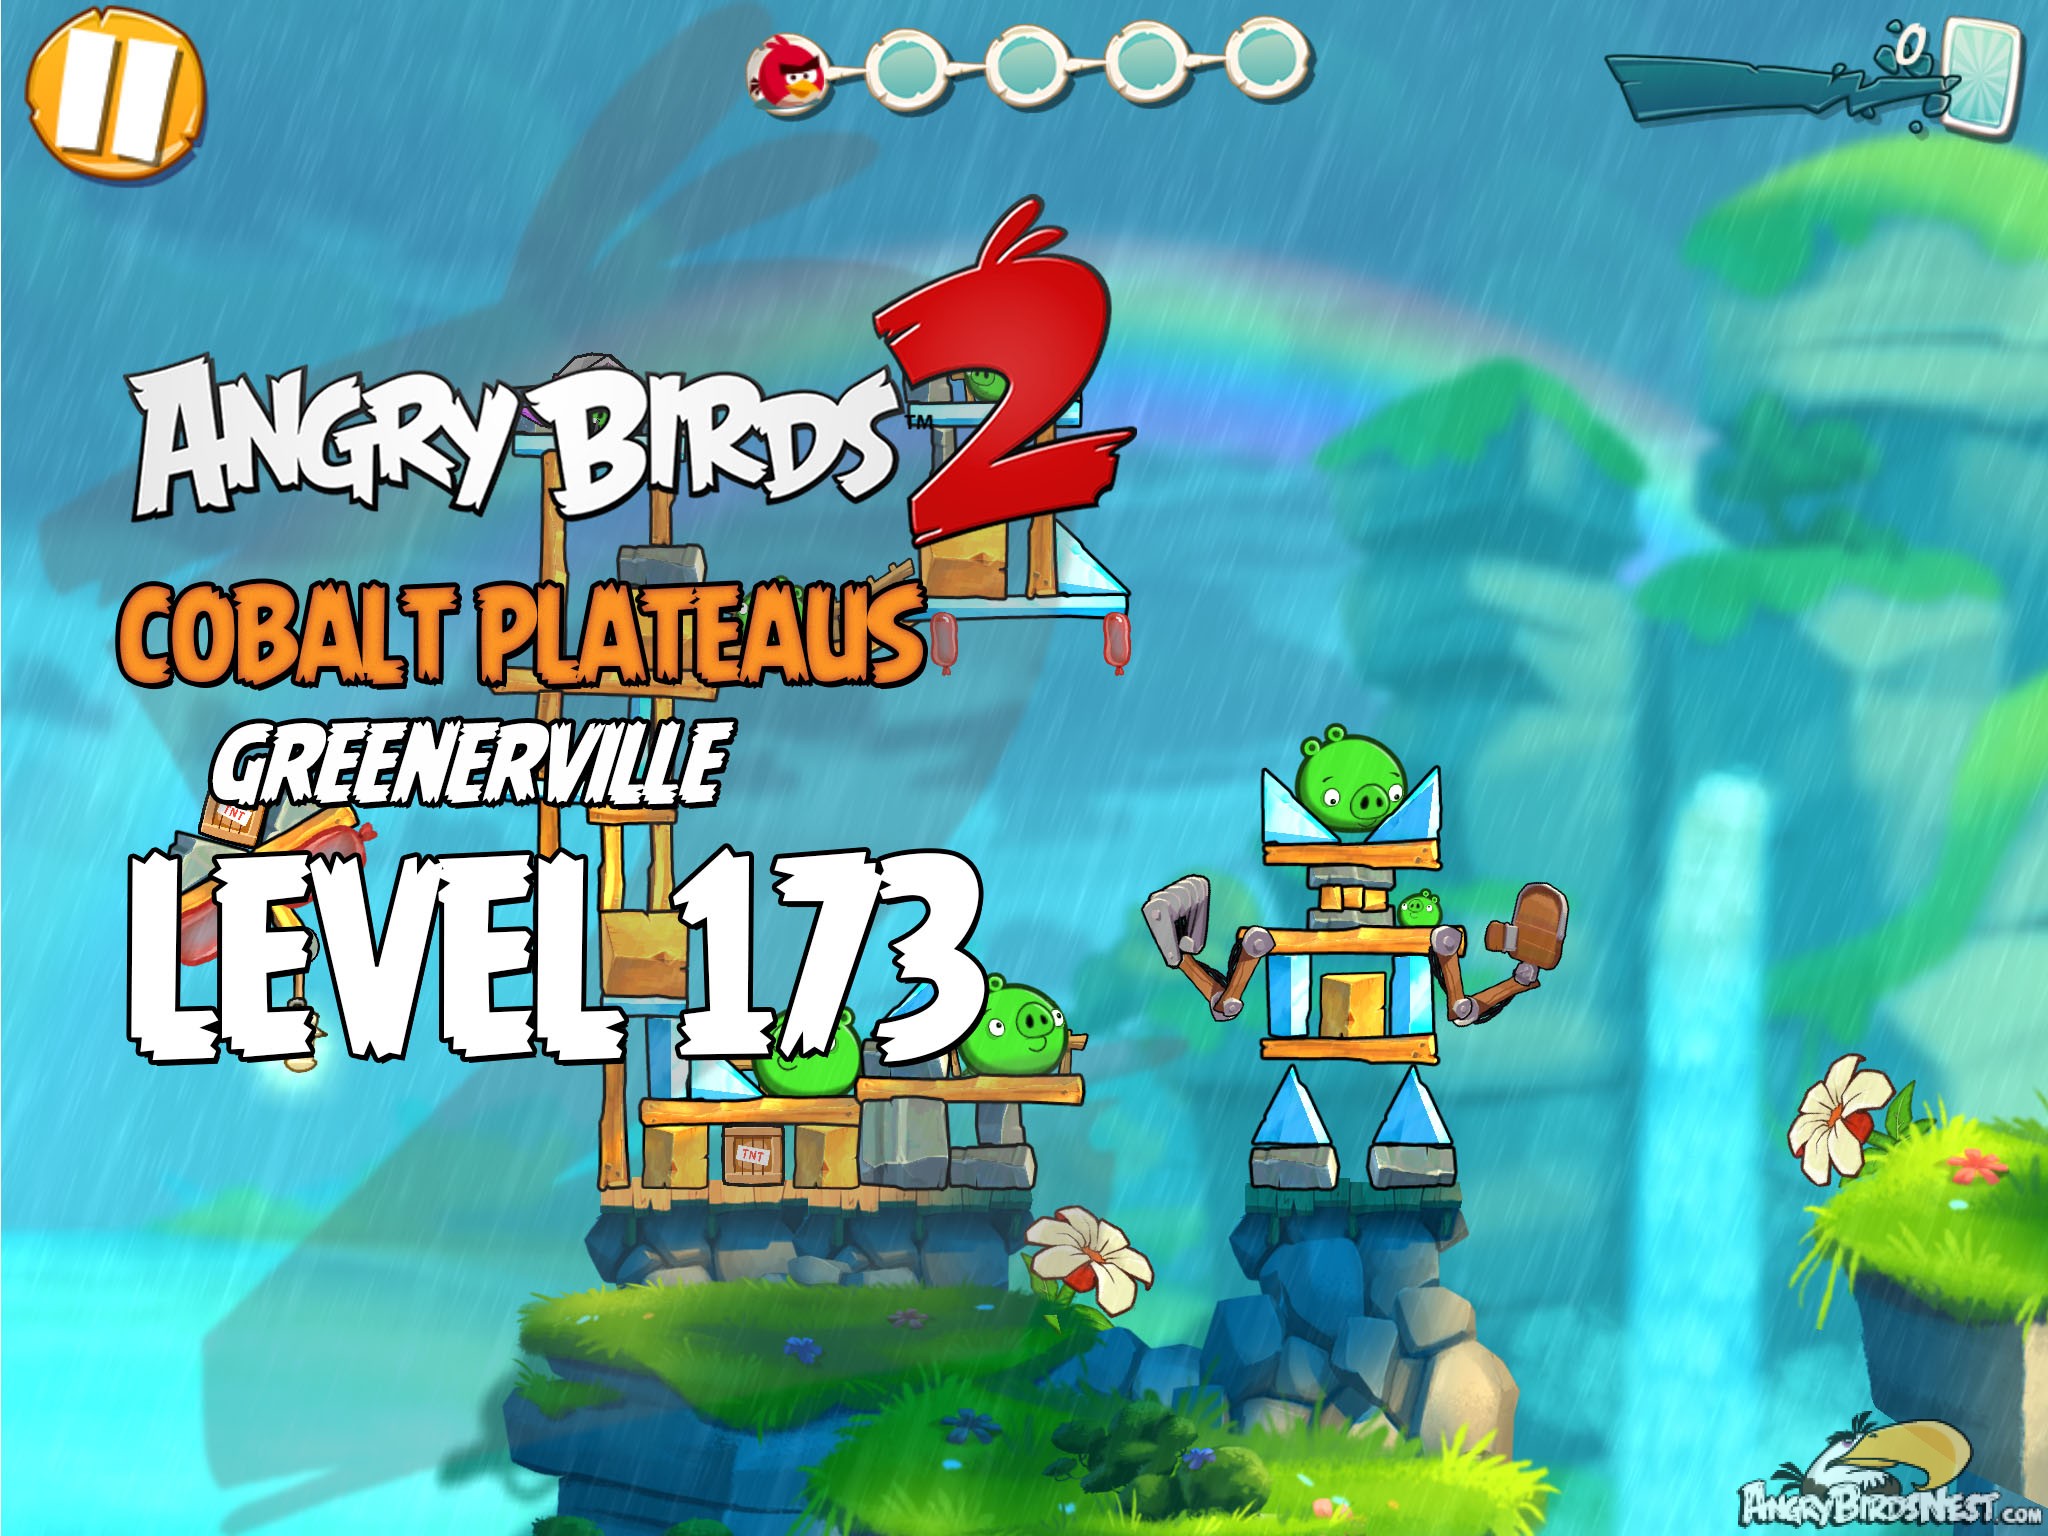 Angry Birds 2 Cobalt Plateaus Greenerville Level 173